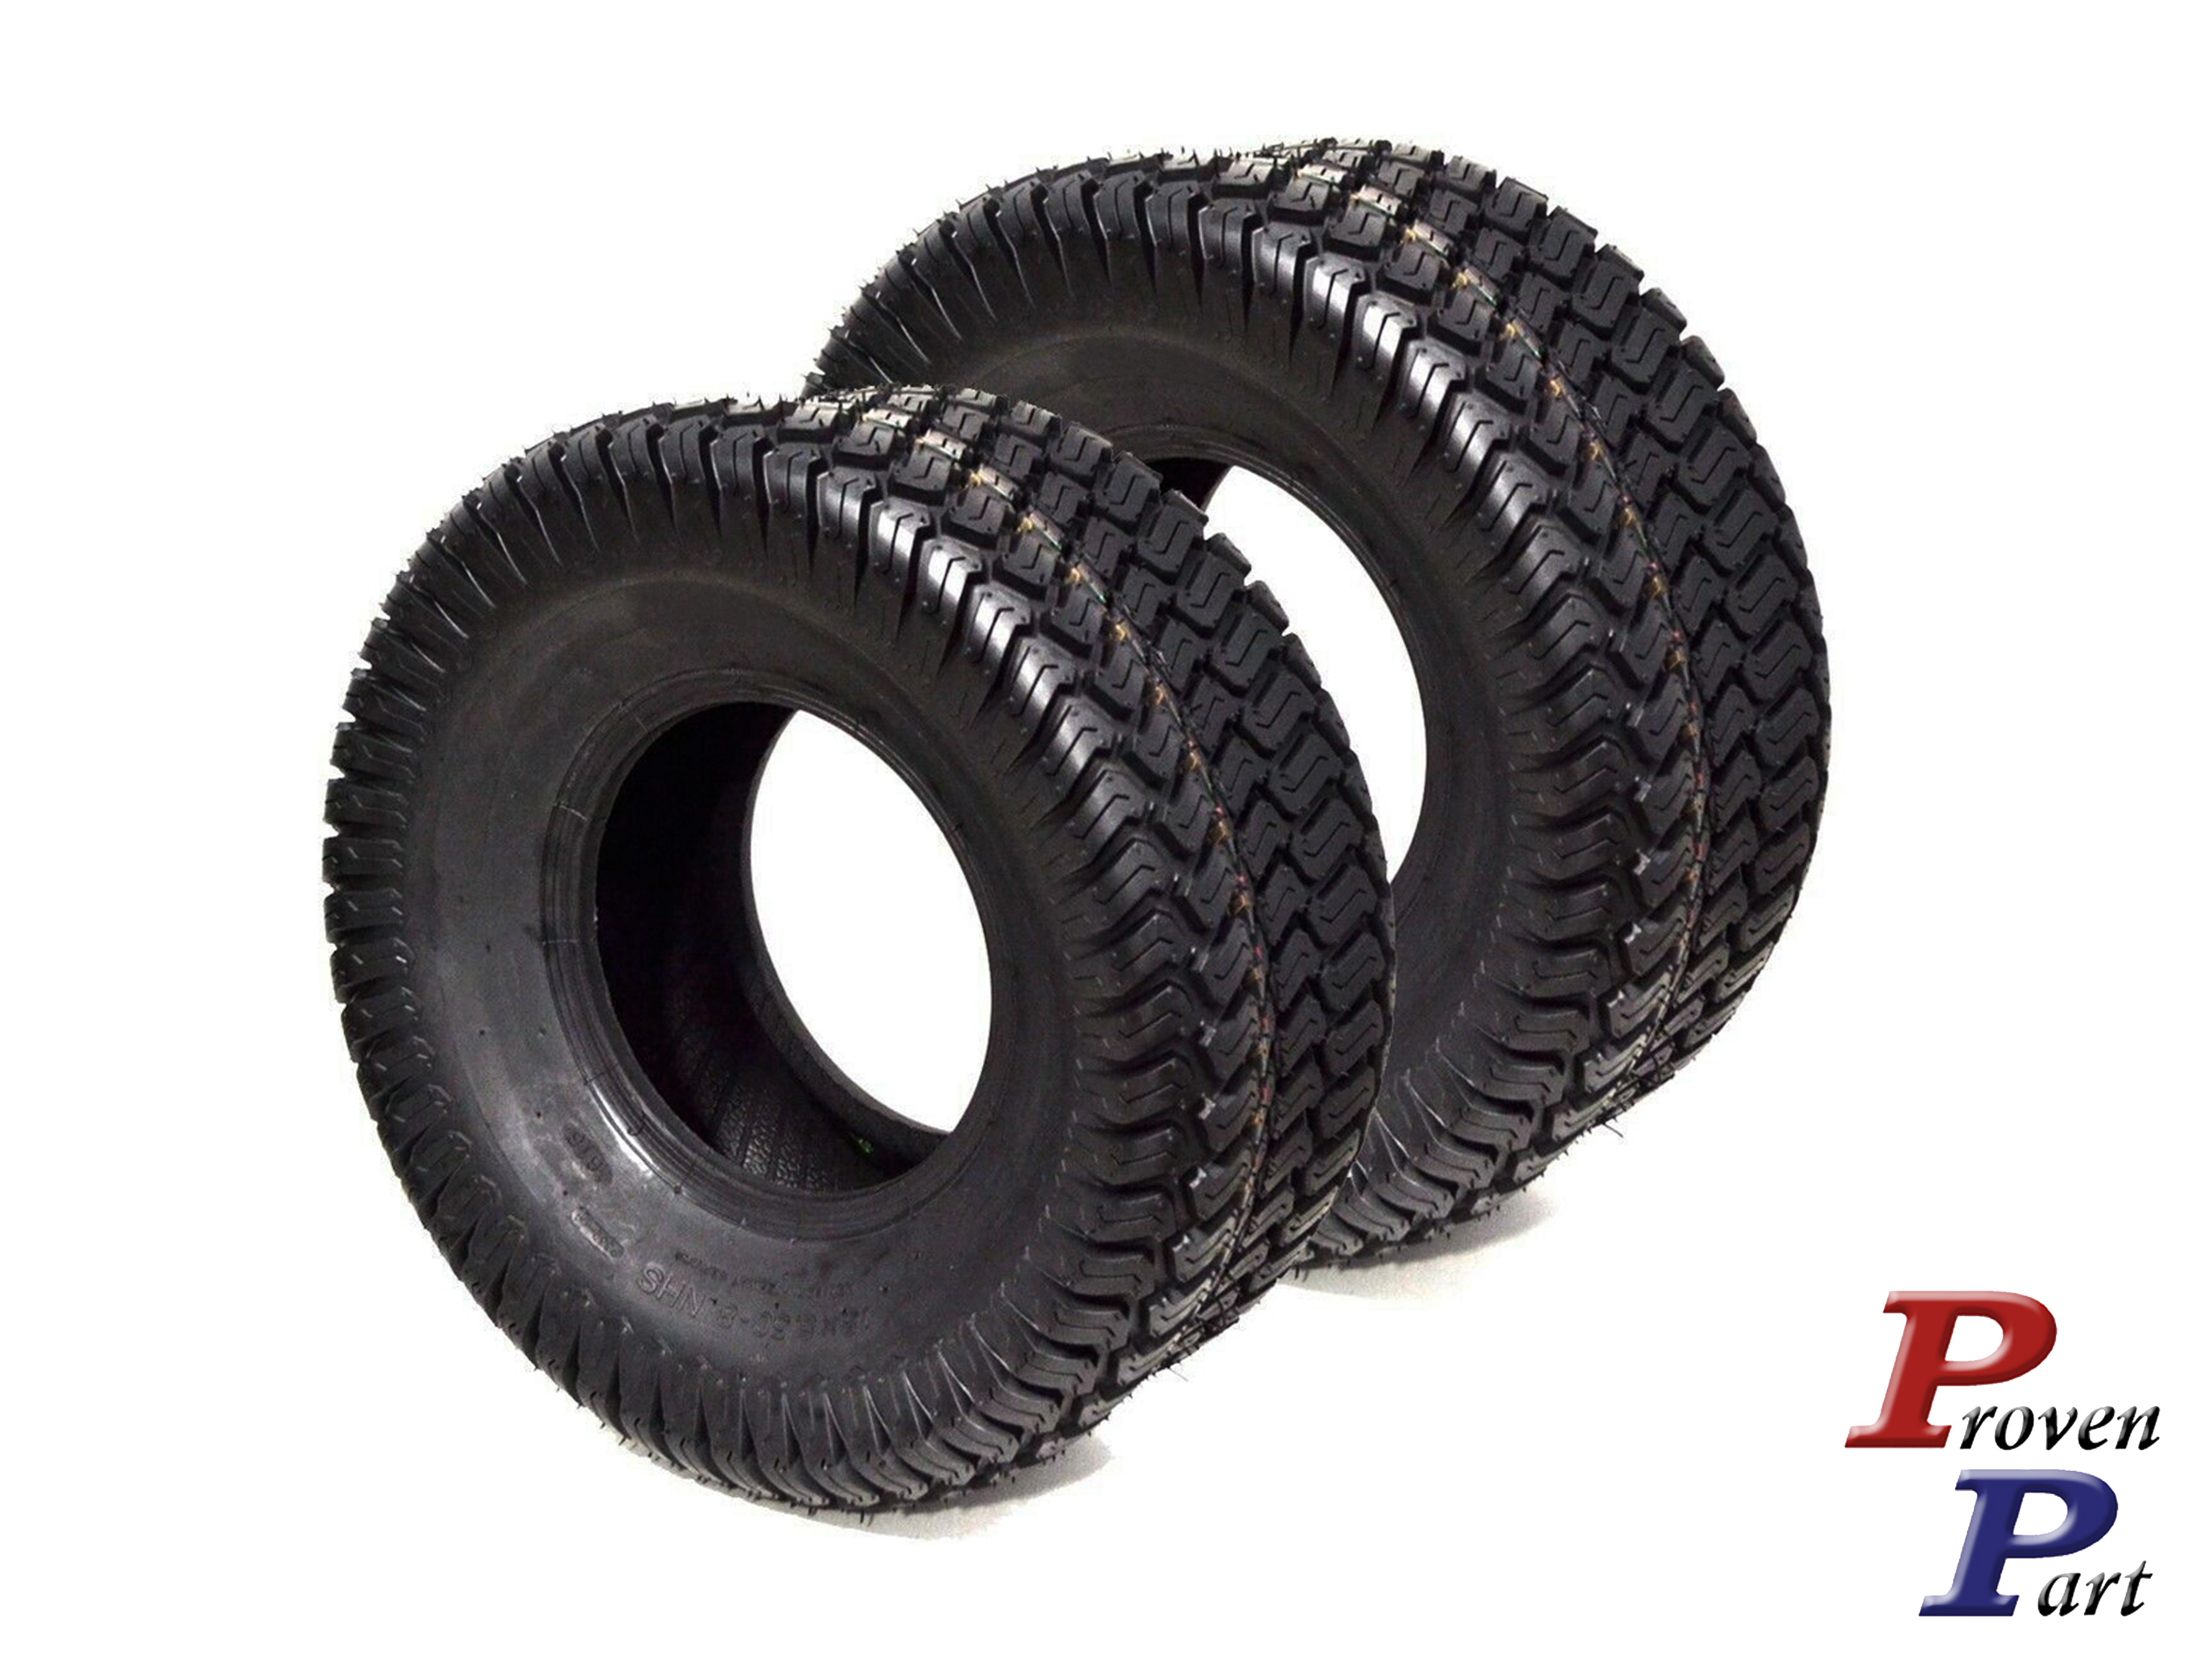 Set of 2 ProMaster 13X6.5-6 lawn mower tubeless tires 4 Ply